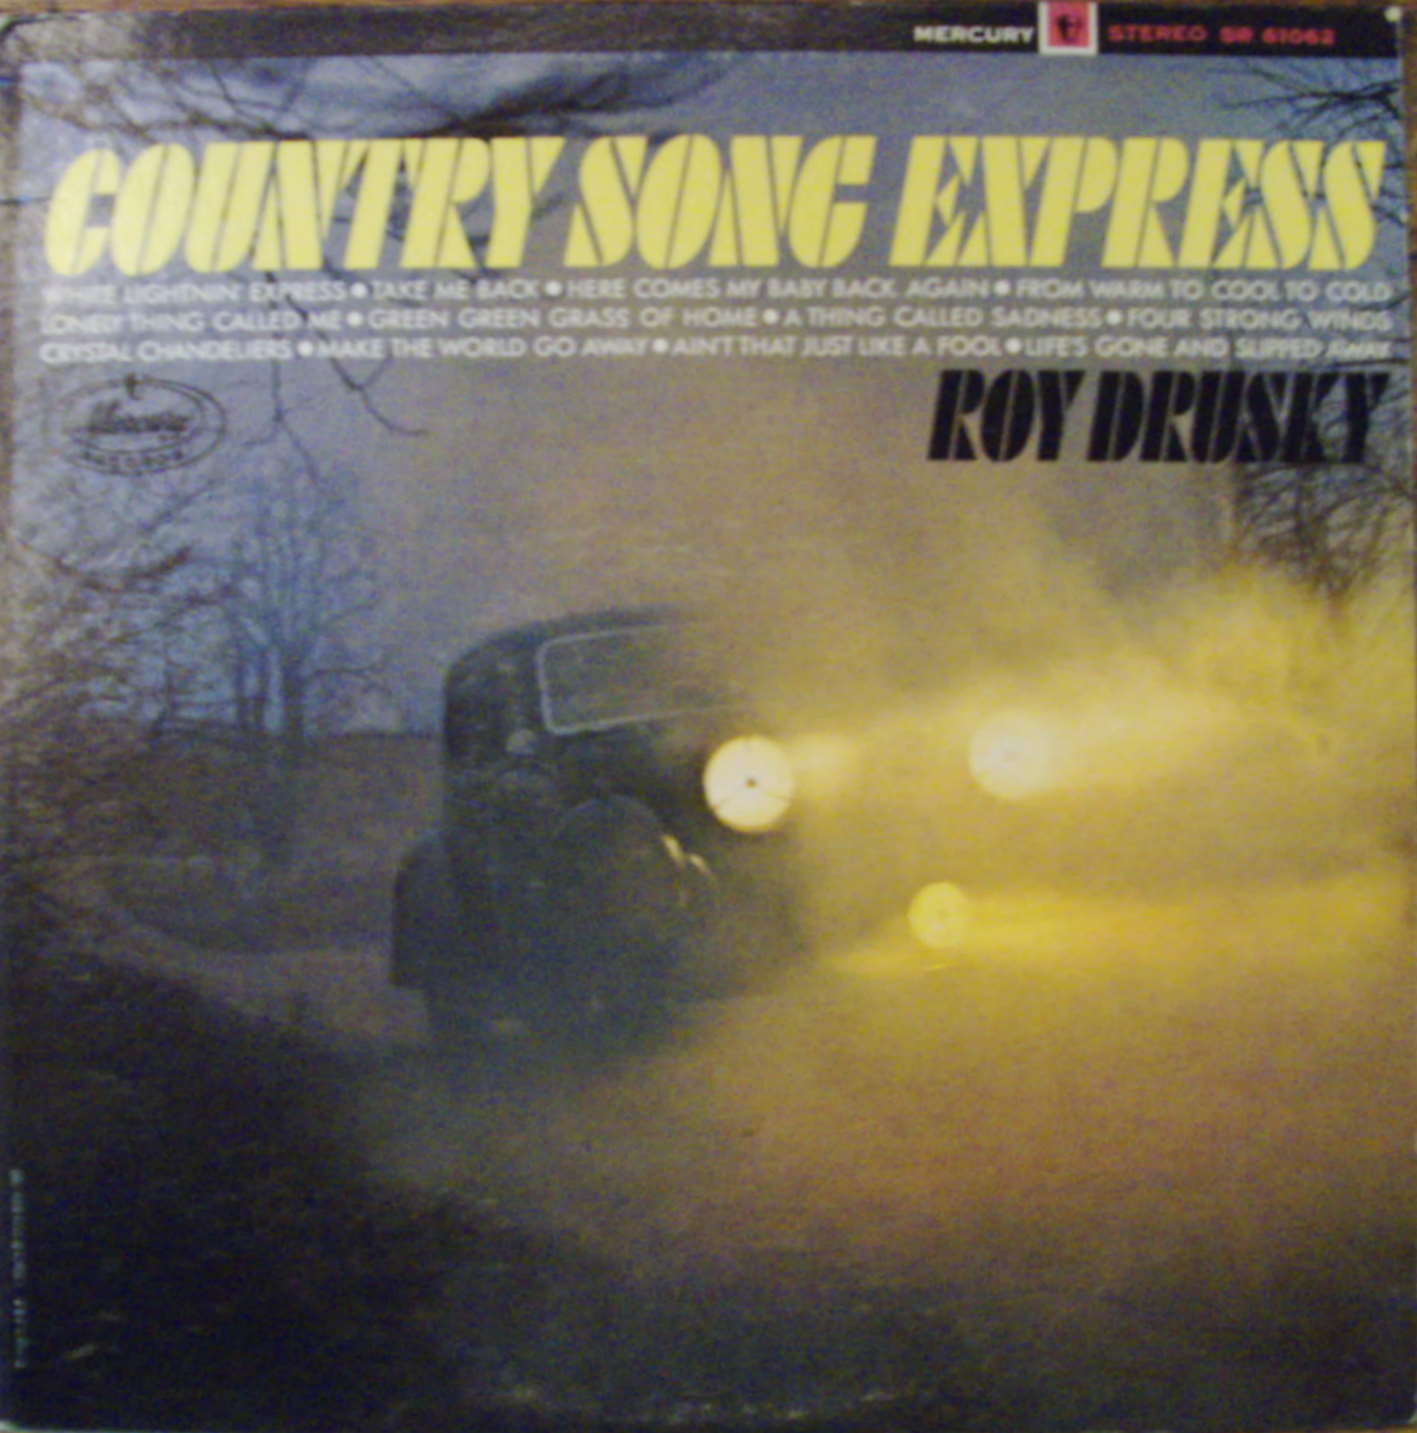 Roy Drusky / Country Song Express